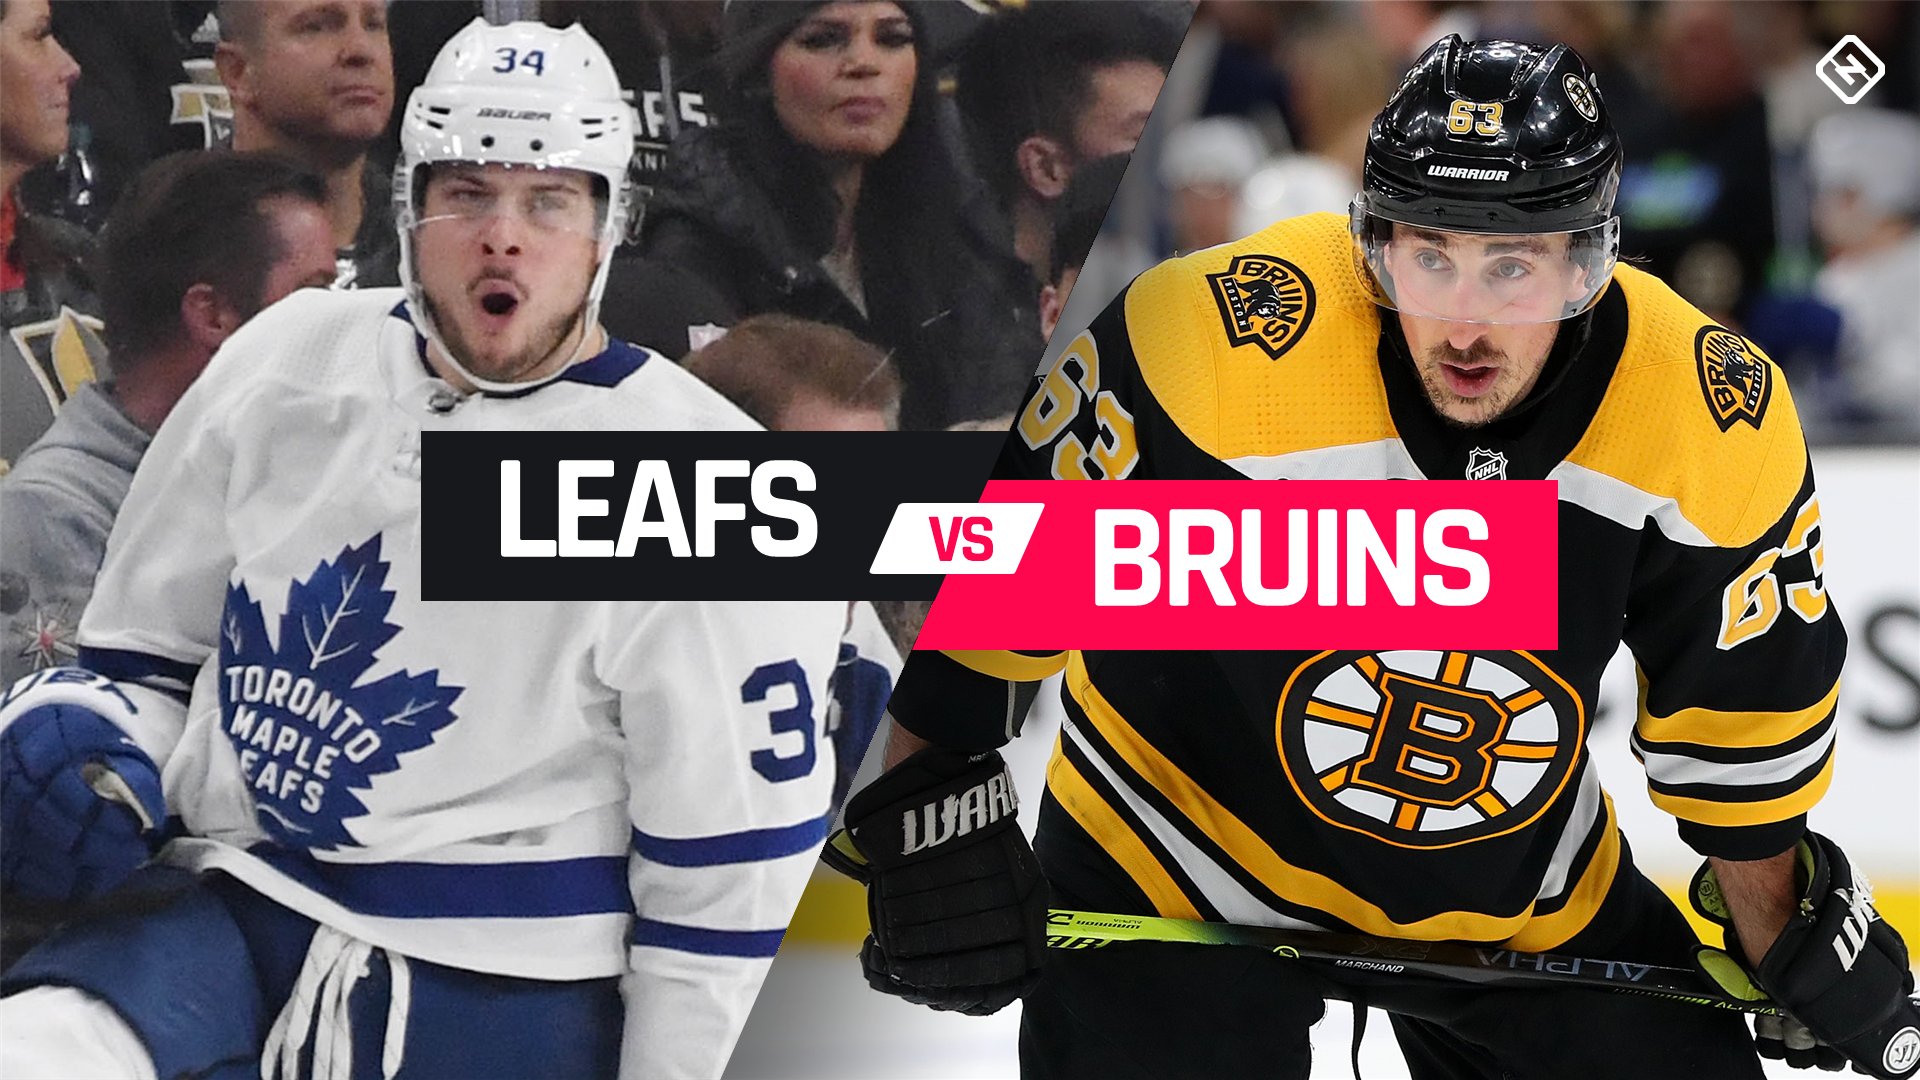 Maple Leafs vs. Bruins Live score, Game 7 updates, highlights from